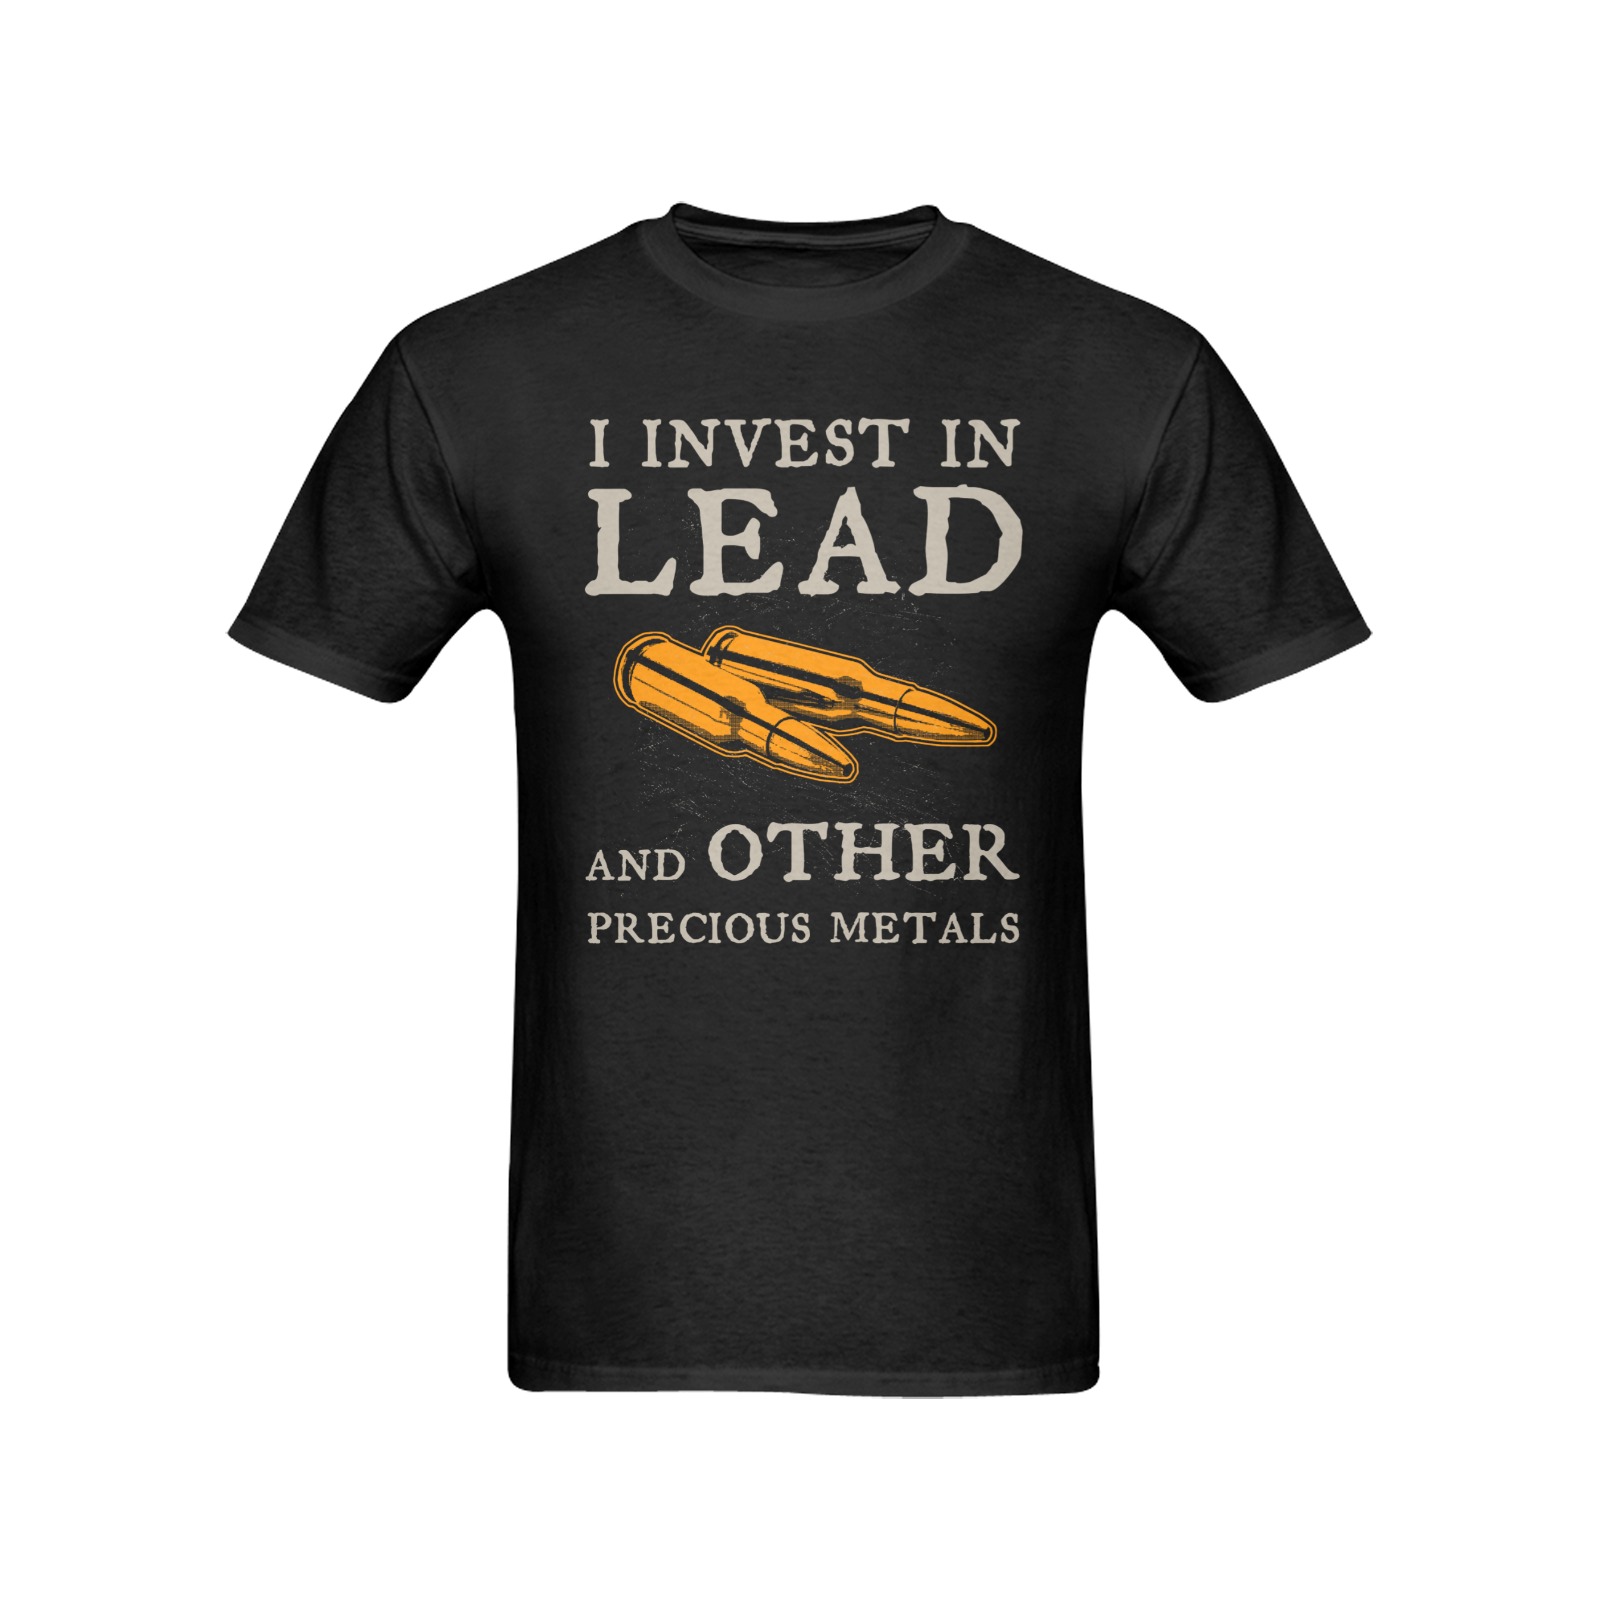 “I Invest In Lead And Other Precious Metals” – Men’s T-Shirt | Black